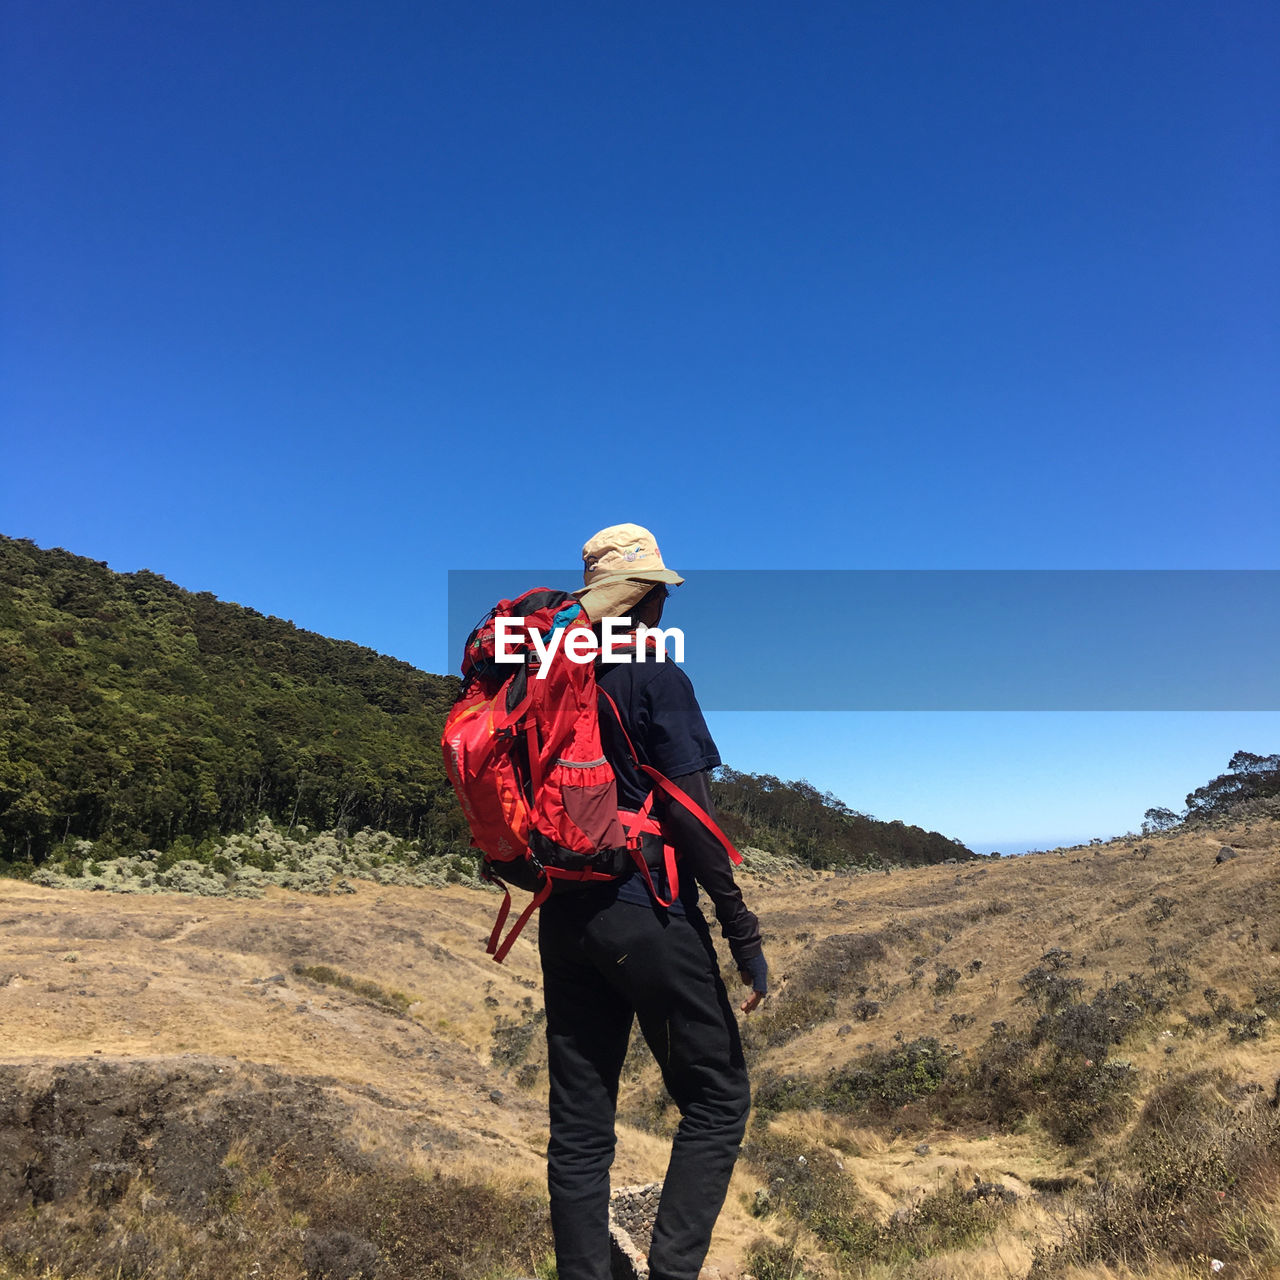 Rear view of man looking at mountain against clear blue sky